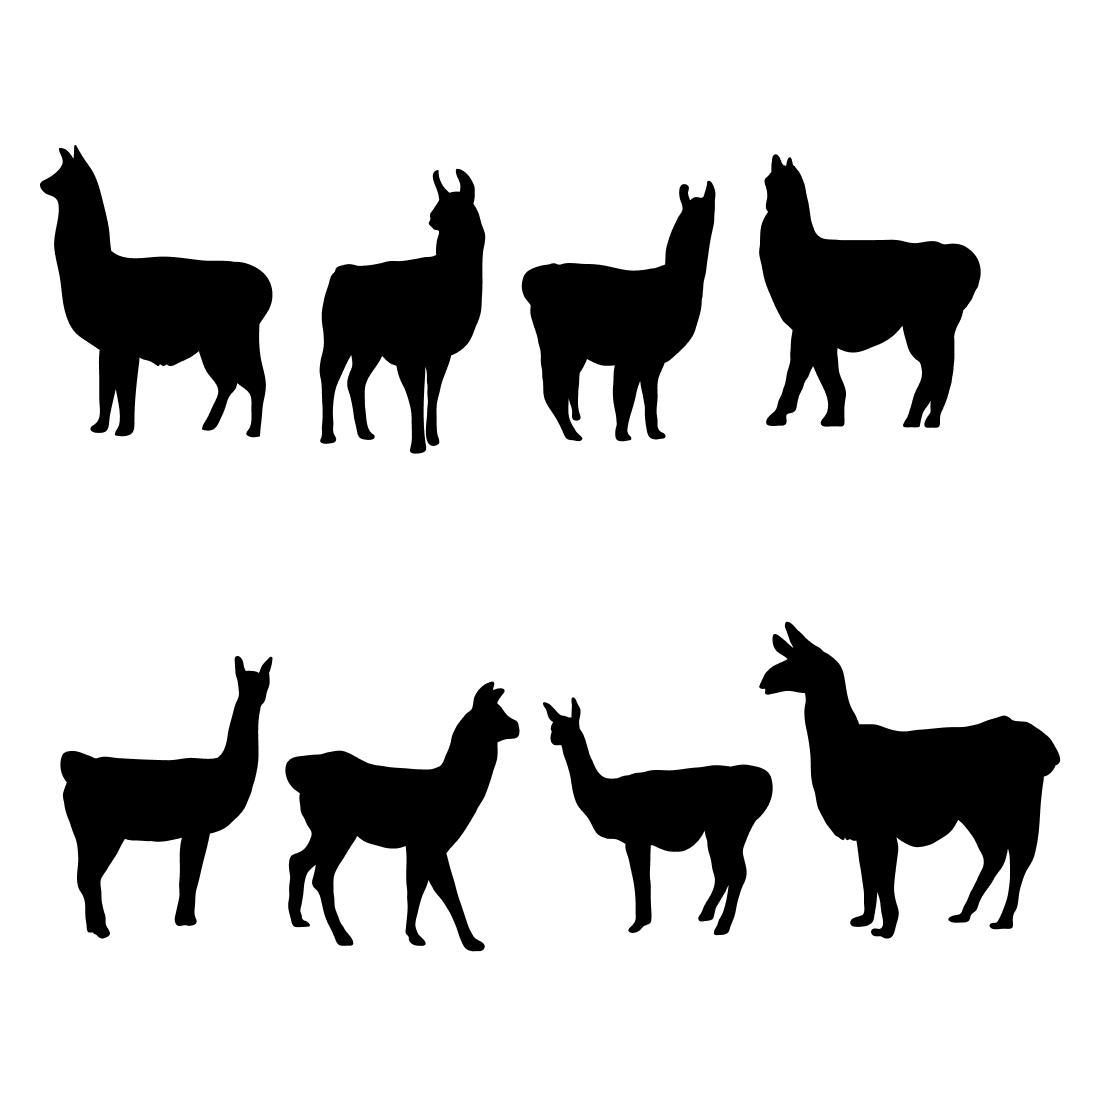 Group of llamas silhouetted against a white background.